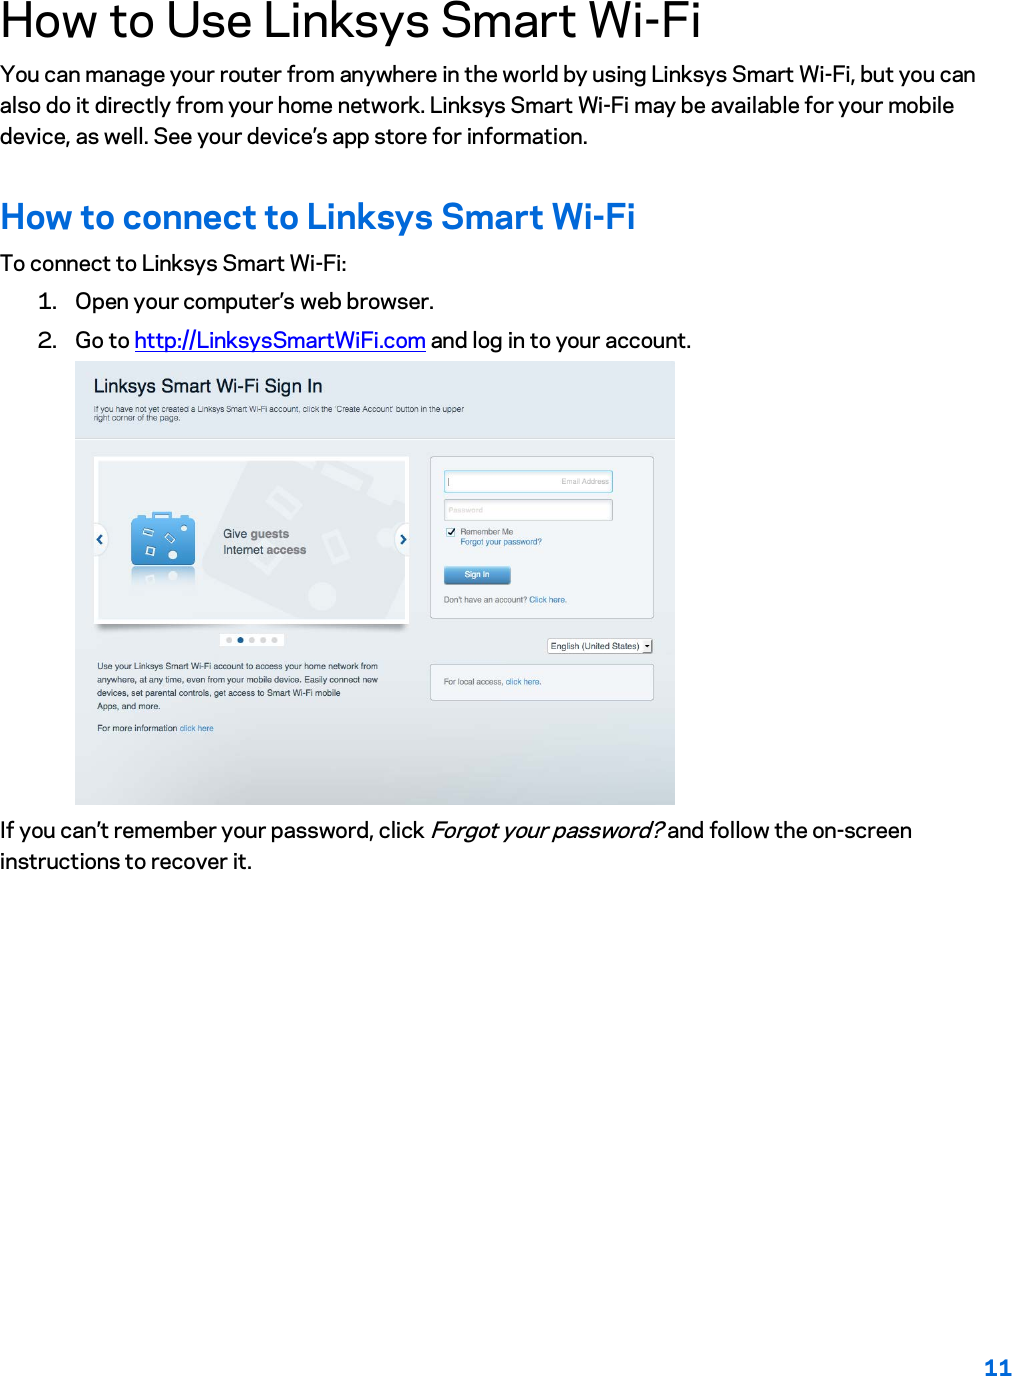 11  How to Use Linksys Smart Wi-Fi You can manage your router from anywhere in the world by using Linksys Smart Wi-Fi, but you can also do it directly from your home network. Linksys Smart Wi-Fi may be available for your mobile device, as well. See your device’s app store for information. How to connect to Linksys Smart Wi-Fi To connect to Linksys Smart Wi-Fi: 1. Open your computer’s web browser. 2. Go to http://LinksysSmartWiFi.com and log in to your account.   If you can’t remember your password, click Forgot your password? and follow the on-screen instructions to recover it. 